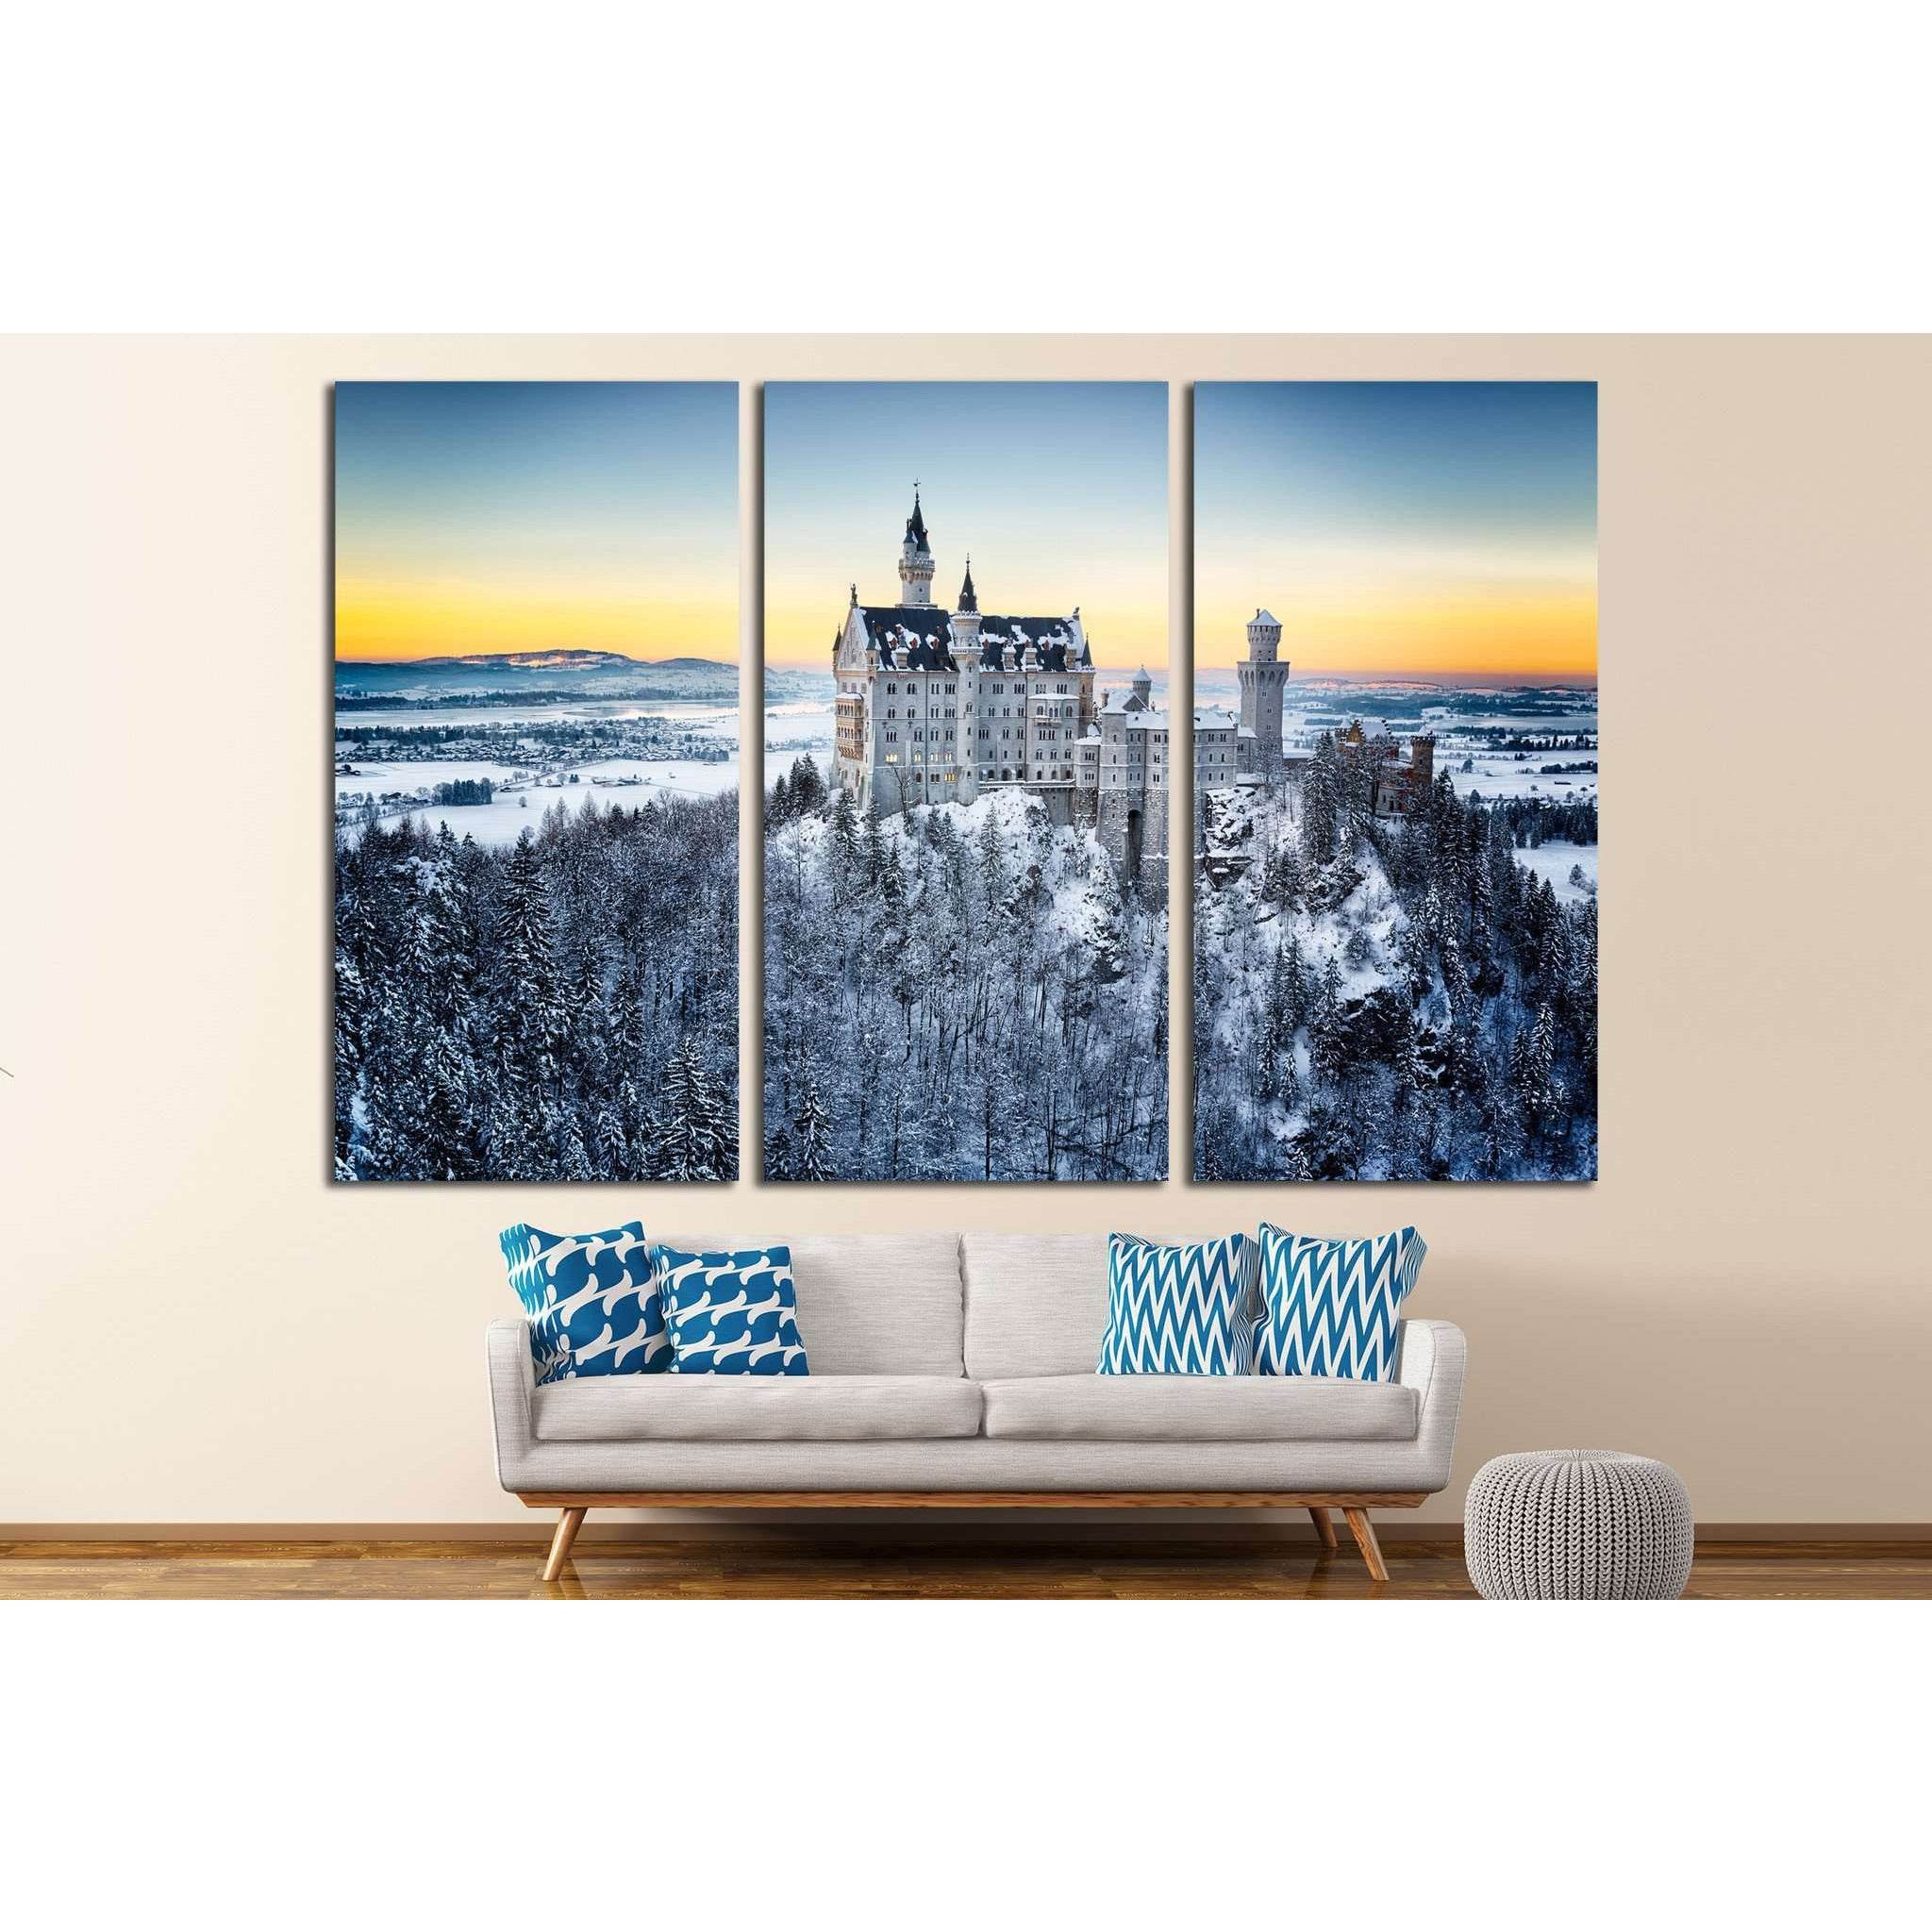 Neuschwanstein Castle at sunset in winter landscape. Germany №1793 Ready to Hang Canvas Print